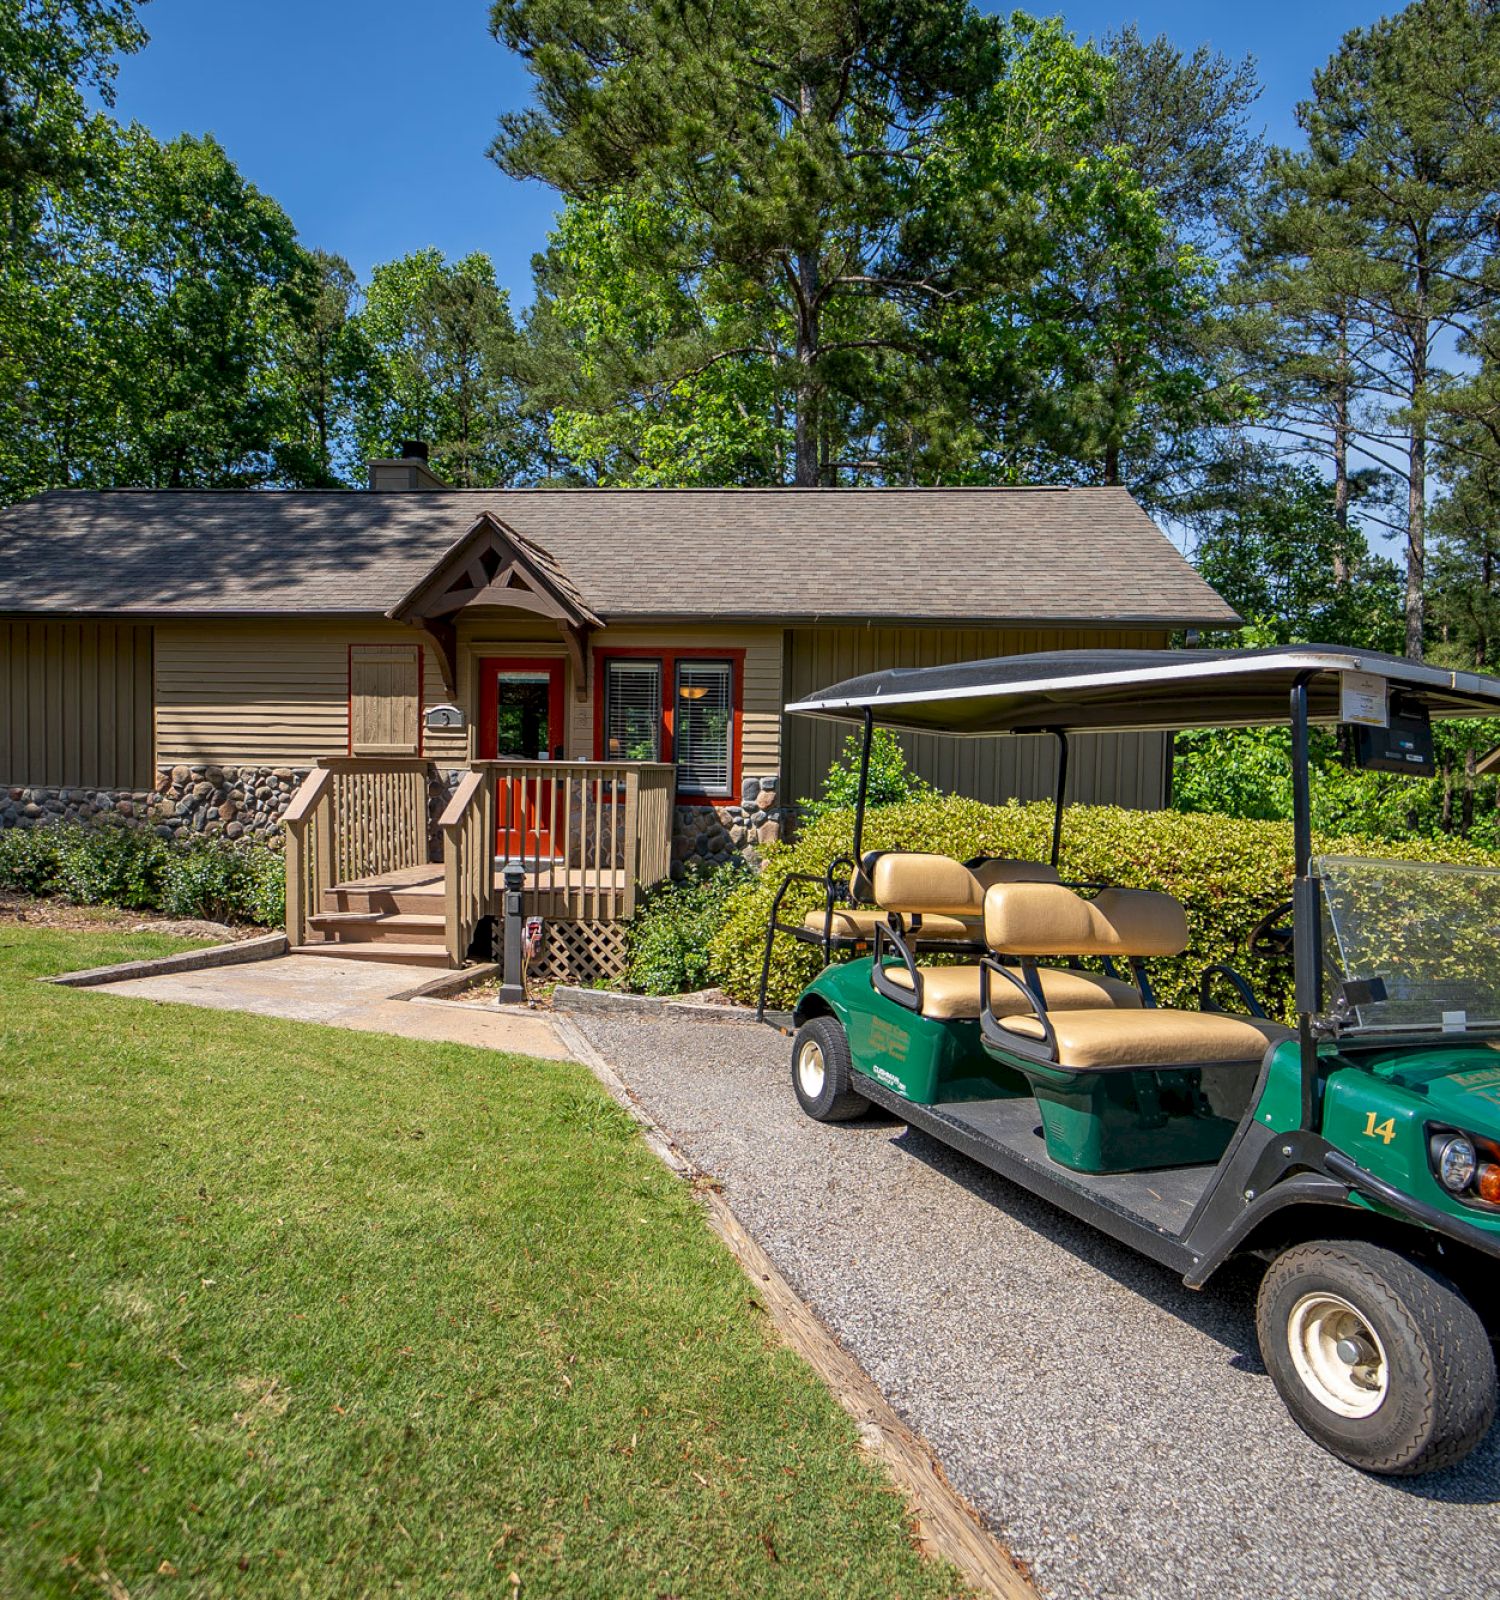 A golf cart parked in front of a house with trees in the background.